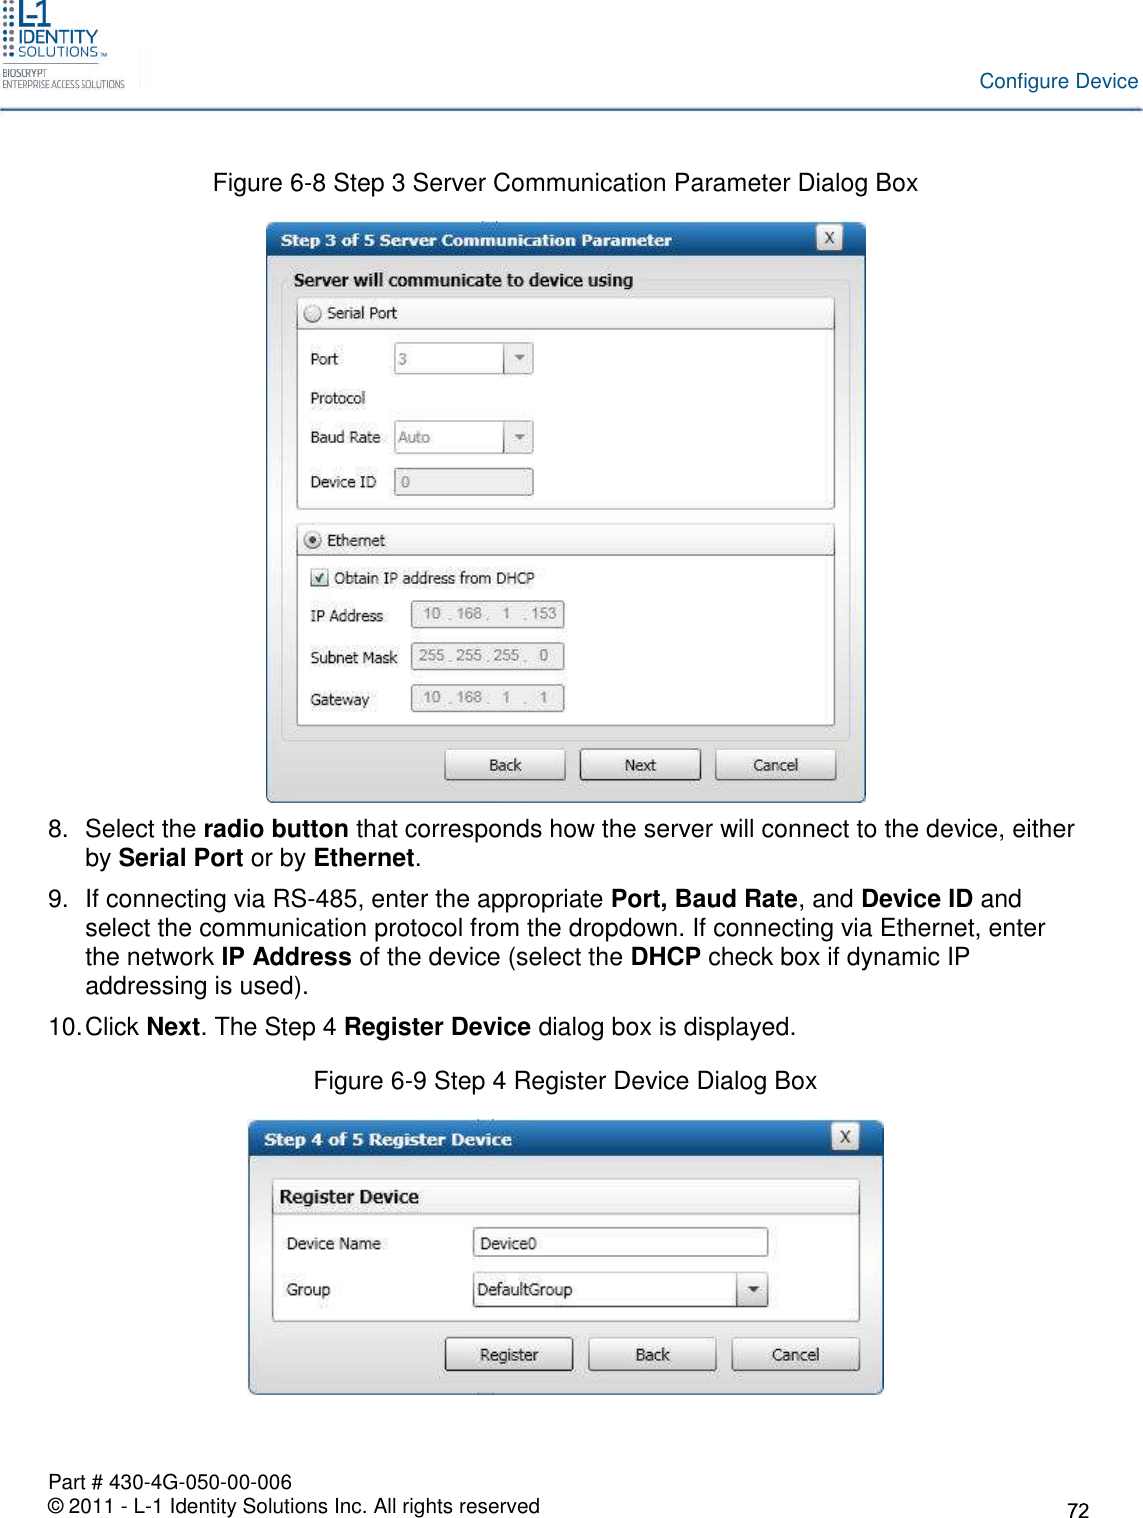 Part # 430-4G-050-00-006© 2011 - L-1 Identity Solutions Inc. All rights reservedConfigure DeviceFigure 6-8 Step 3 Server Communication Parameter Dialog Box8. Select the radio button that corresponds how the server will connect to the device, eitherby Serial Port or by Ethernet.9. If connecting via RS-485, enter the appropriate Port, Baud Rate, and Device ID andselect the communication protocol from the dropdown. If connecting via Ethernet, enterthe network IP Address of the device (select the DHCP check box if dynamic IPaddressing is used).10.Click Next. The Step 4 Register Device dialog box is displayed.Figure 6-9 Step 4 Register Device Dialog Box